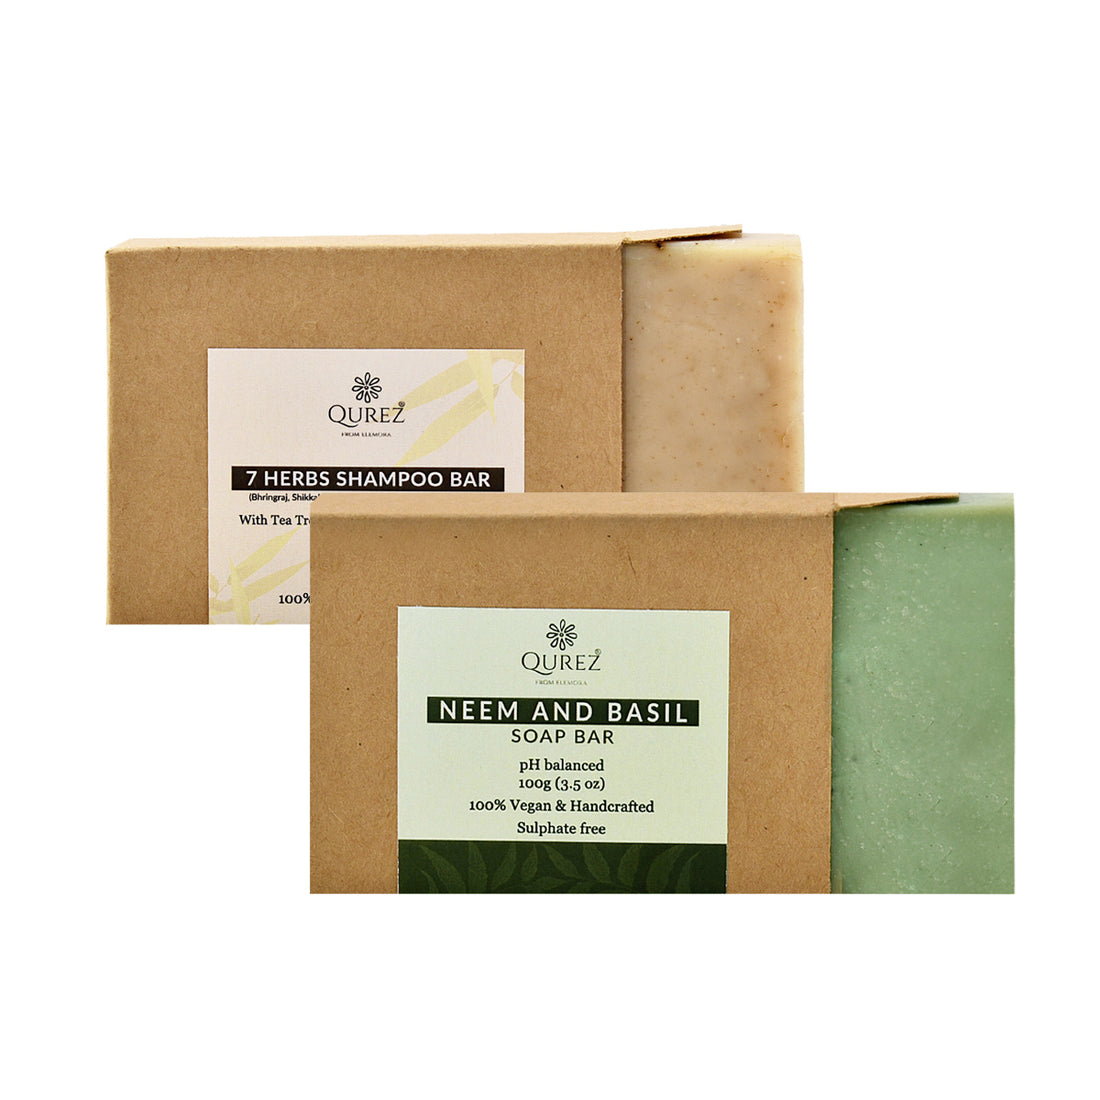 Redefine your bathing experience with our vegan shampoo and soap bars!